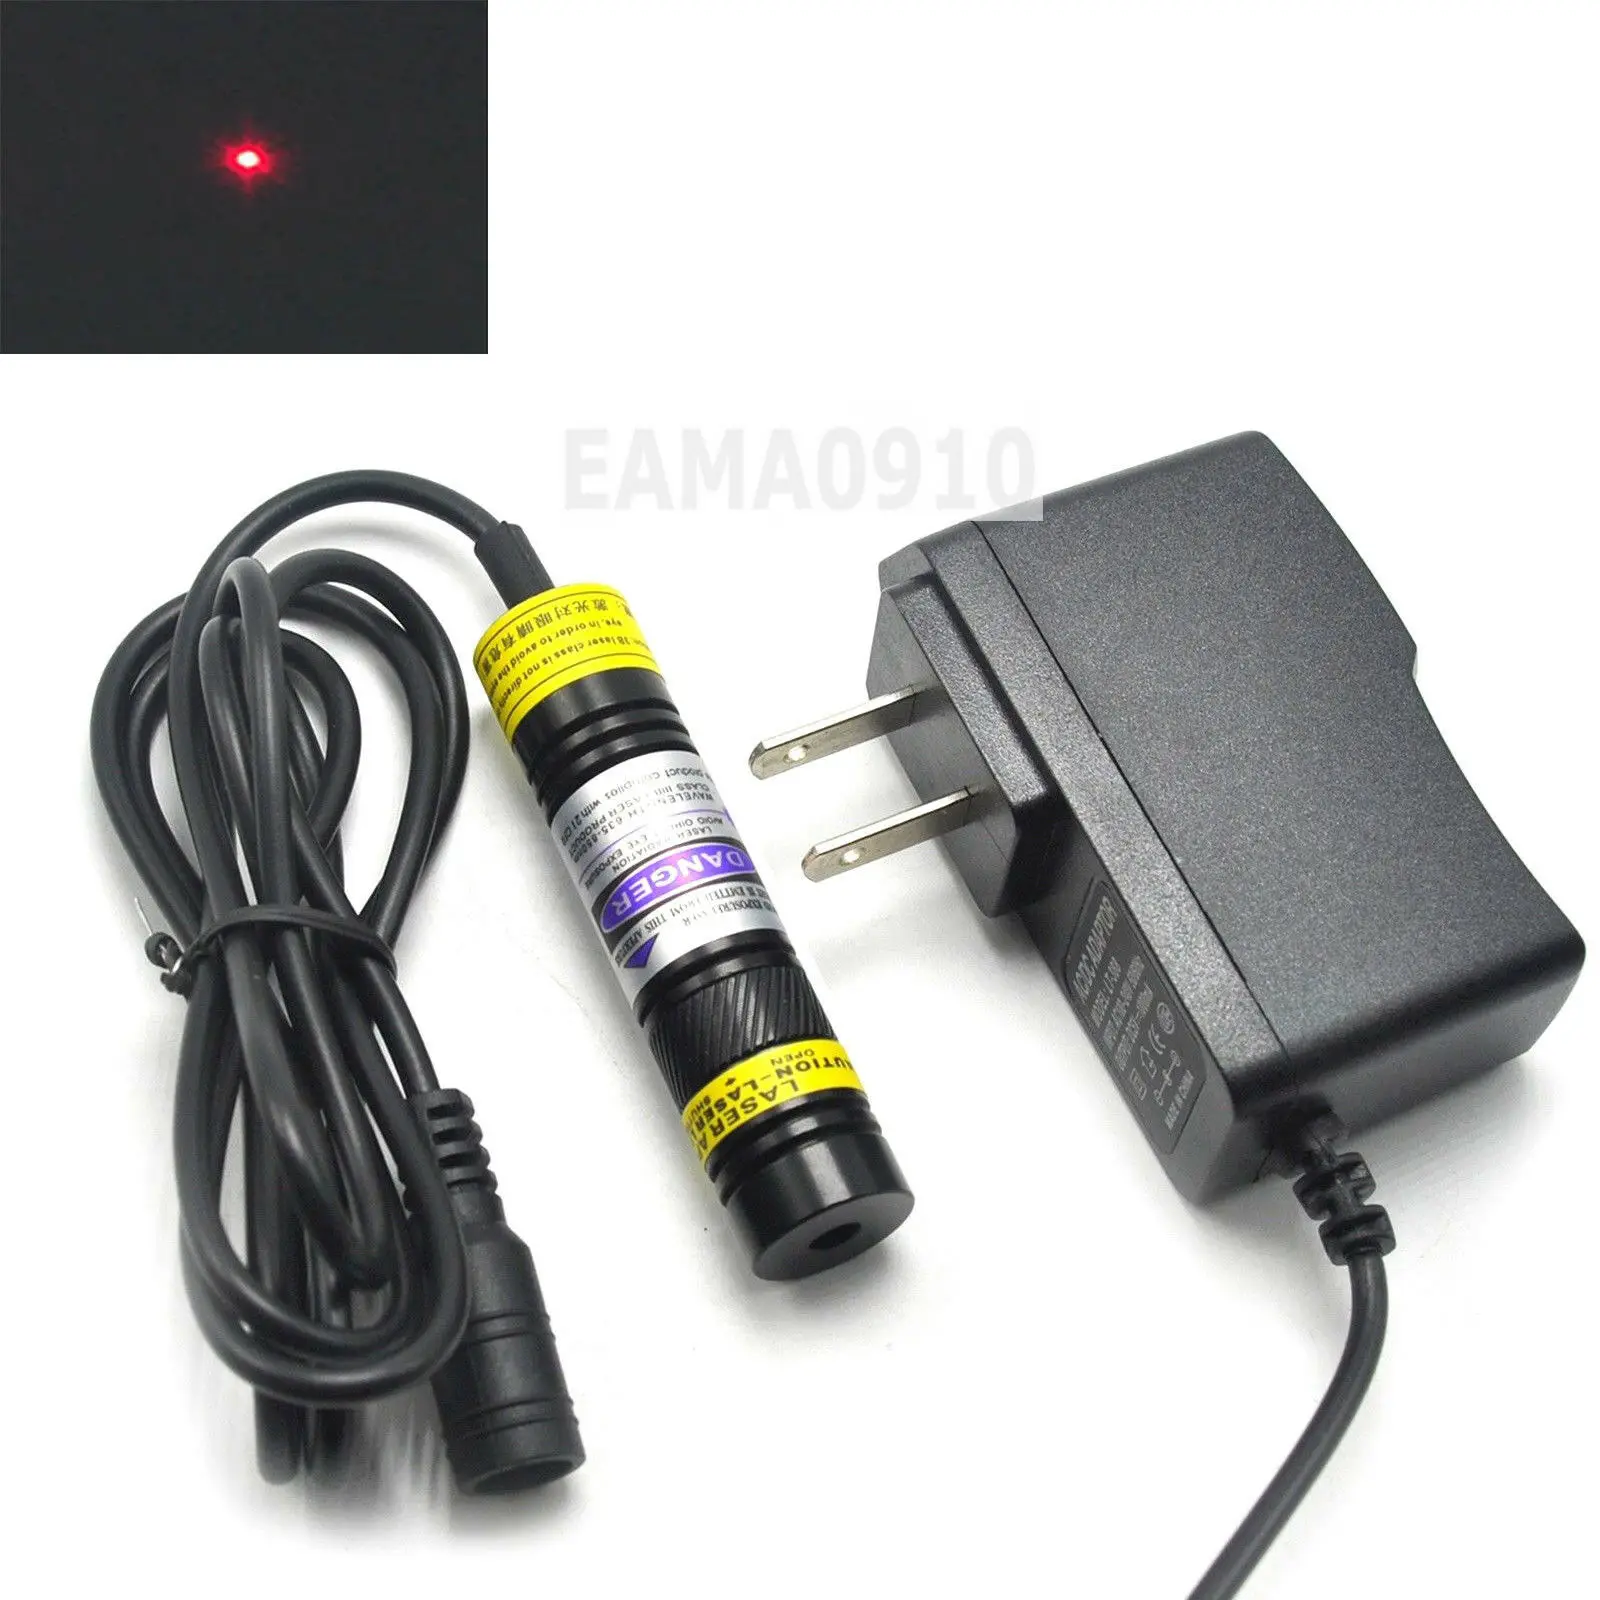 Focusable 650nm 250mW 16X68mm Red Dot Mitsubishi Diode Laser Module w/5V Adapter focusable 250mw 650nm dot focus red laser module w 5v ac adapter3030